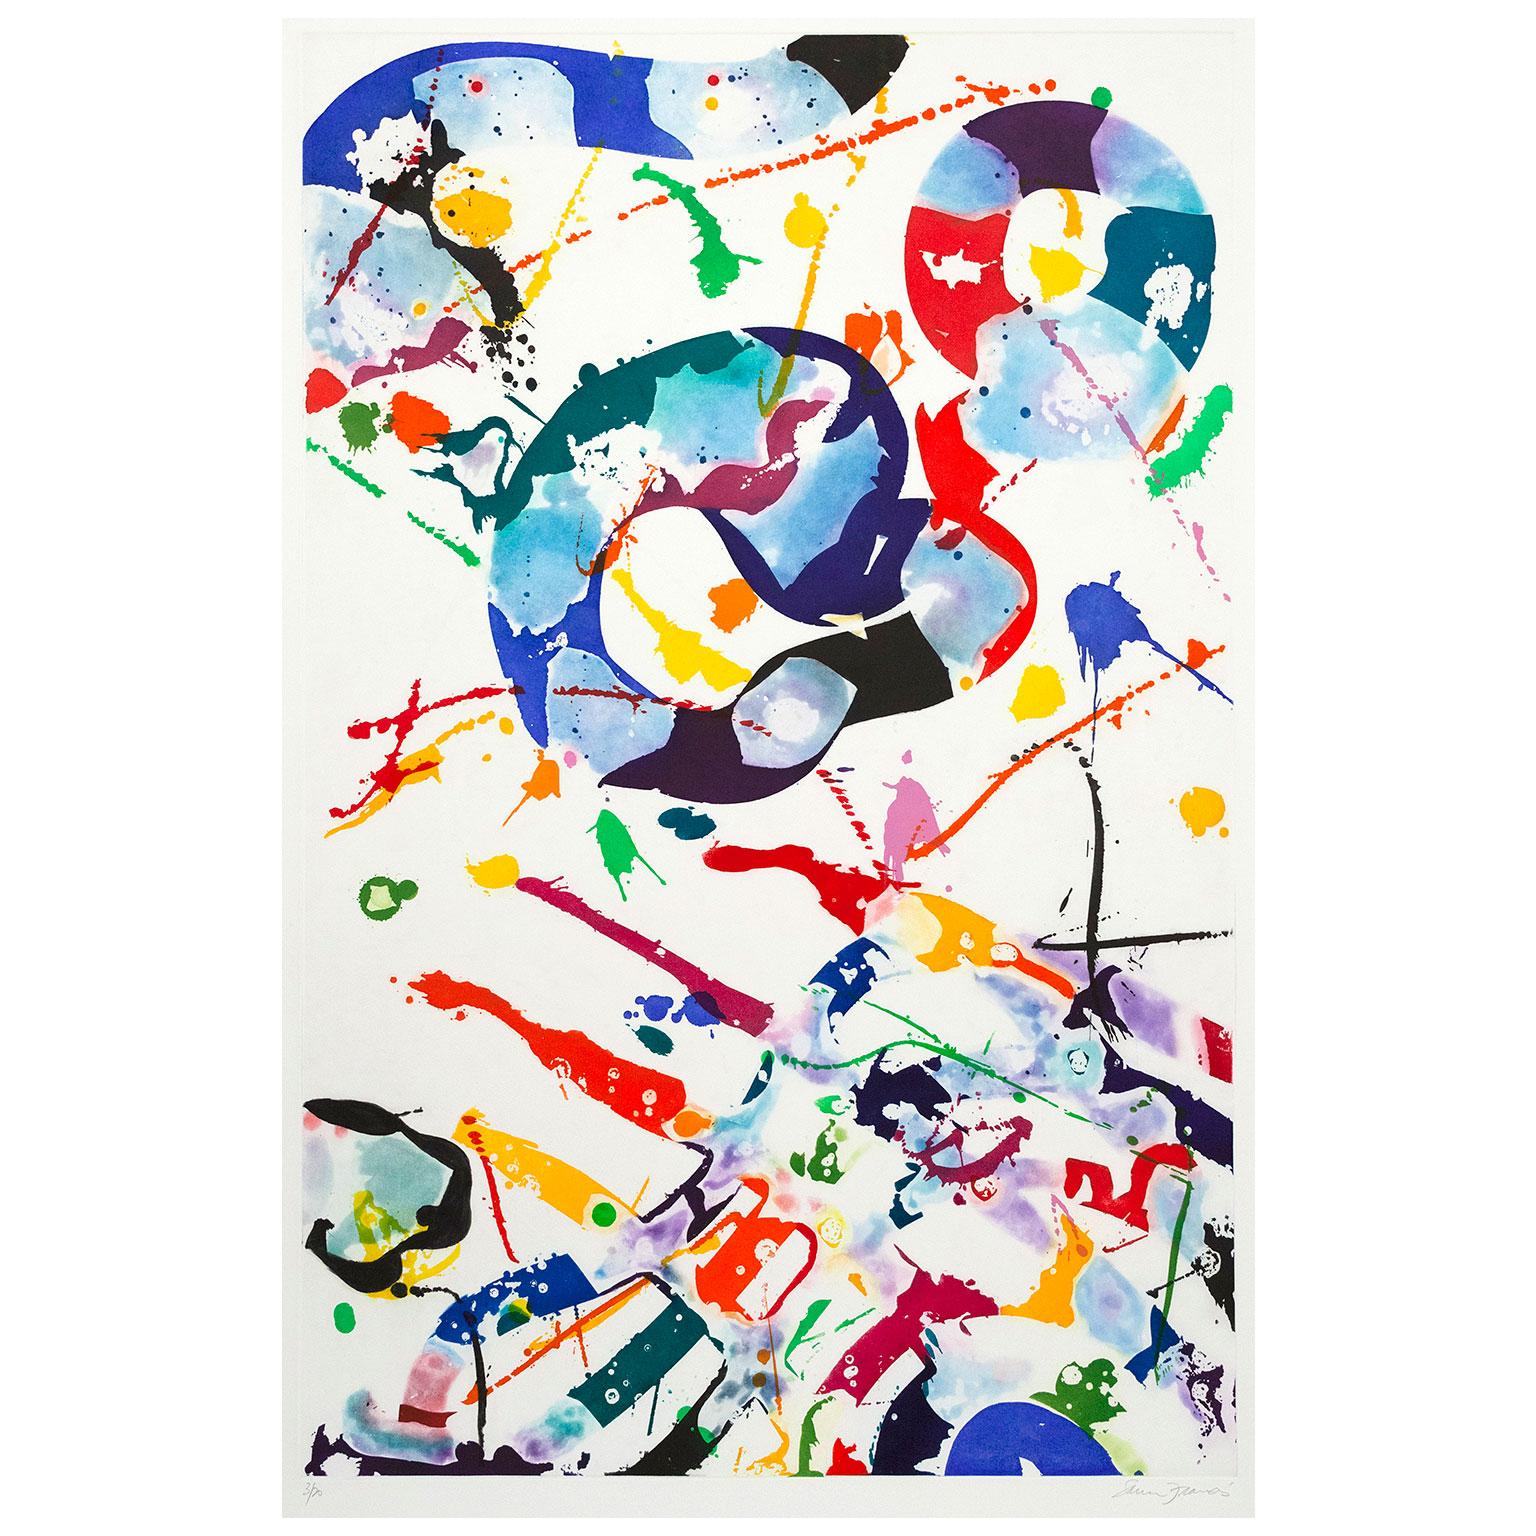 A preeminent figure in 20th century abstraction, Sam Francis (1923-1994) is renowned for his dynamic and colorful works.

Printmaking was an essential part of his practice. Similar to Robert Motherwell, Francis became so transfixed by the medium, he